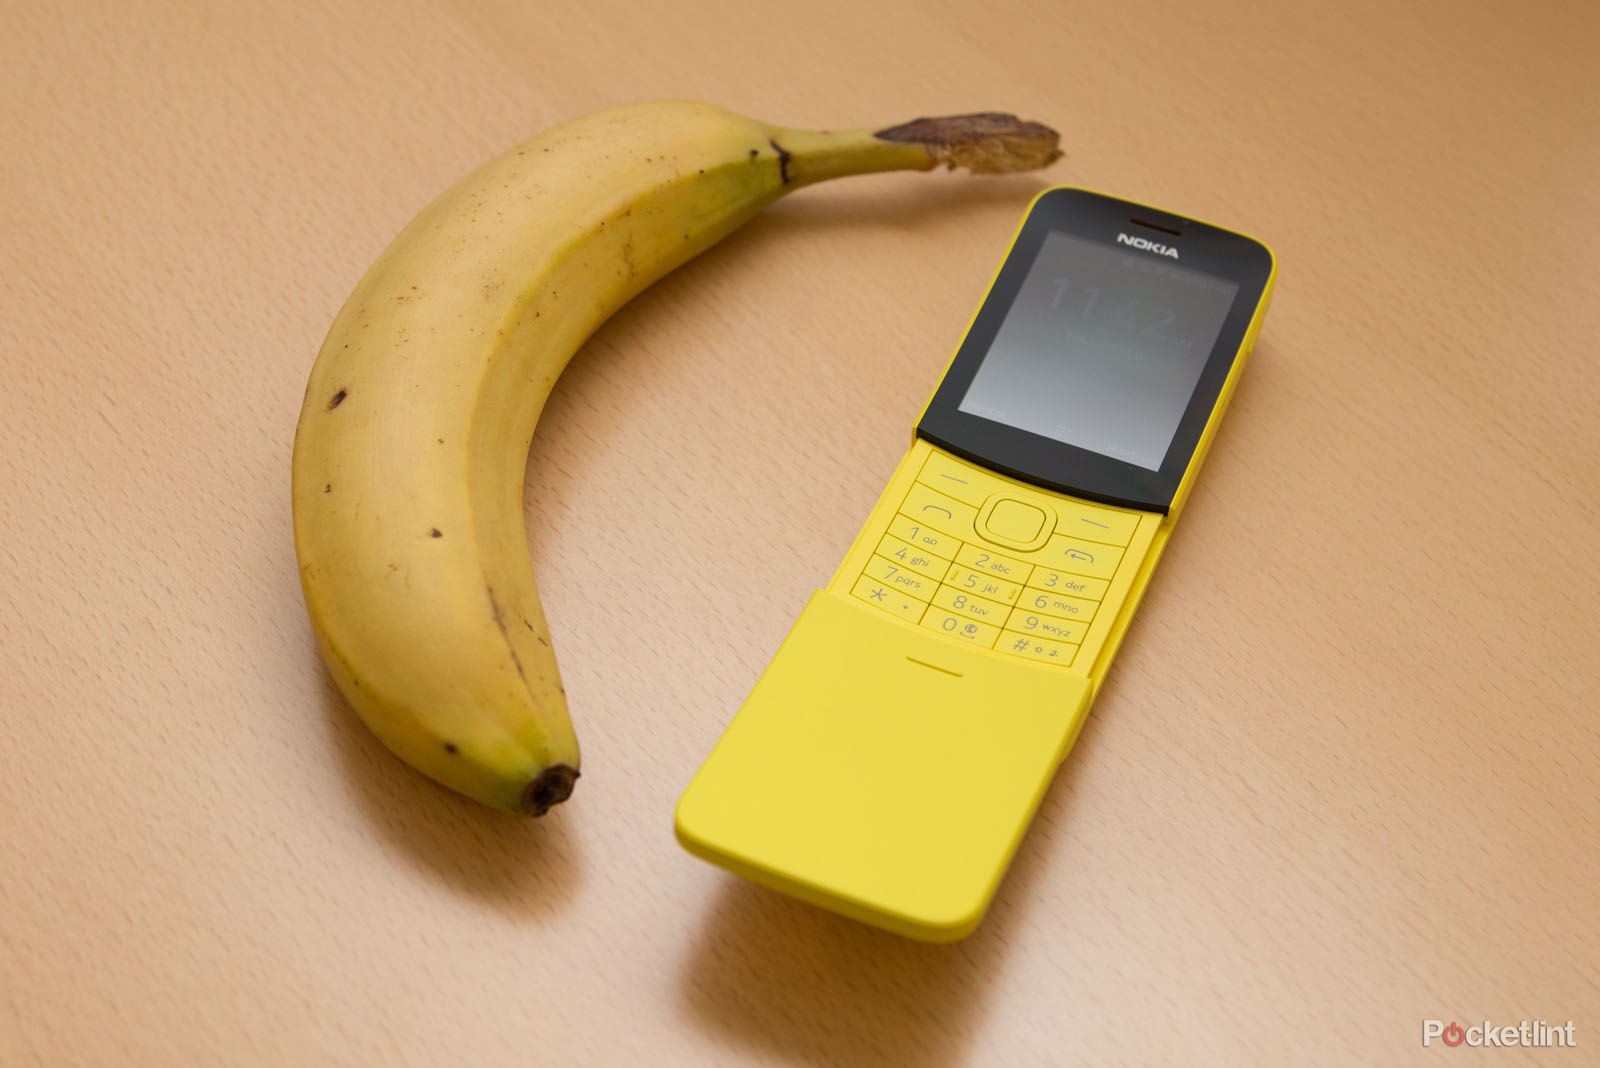 Nokia feature phone spotted running a lightweight custom version of Android image 1